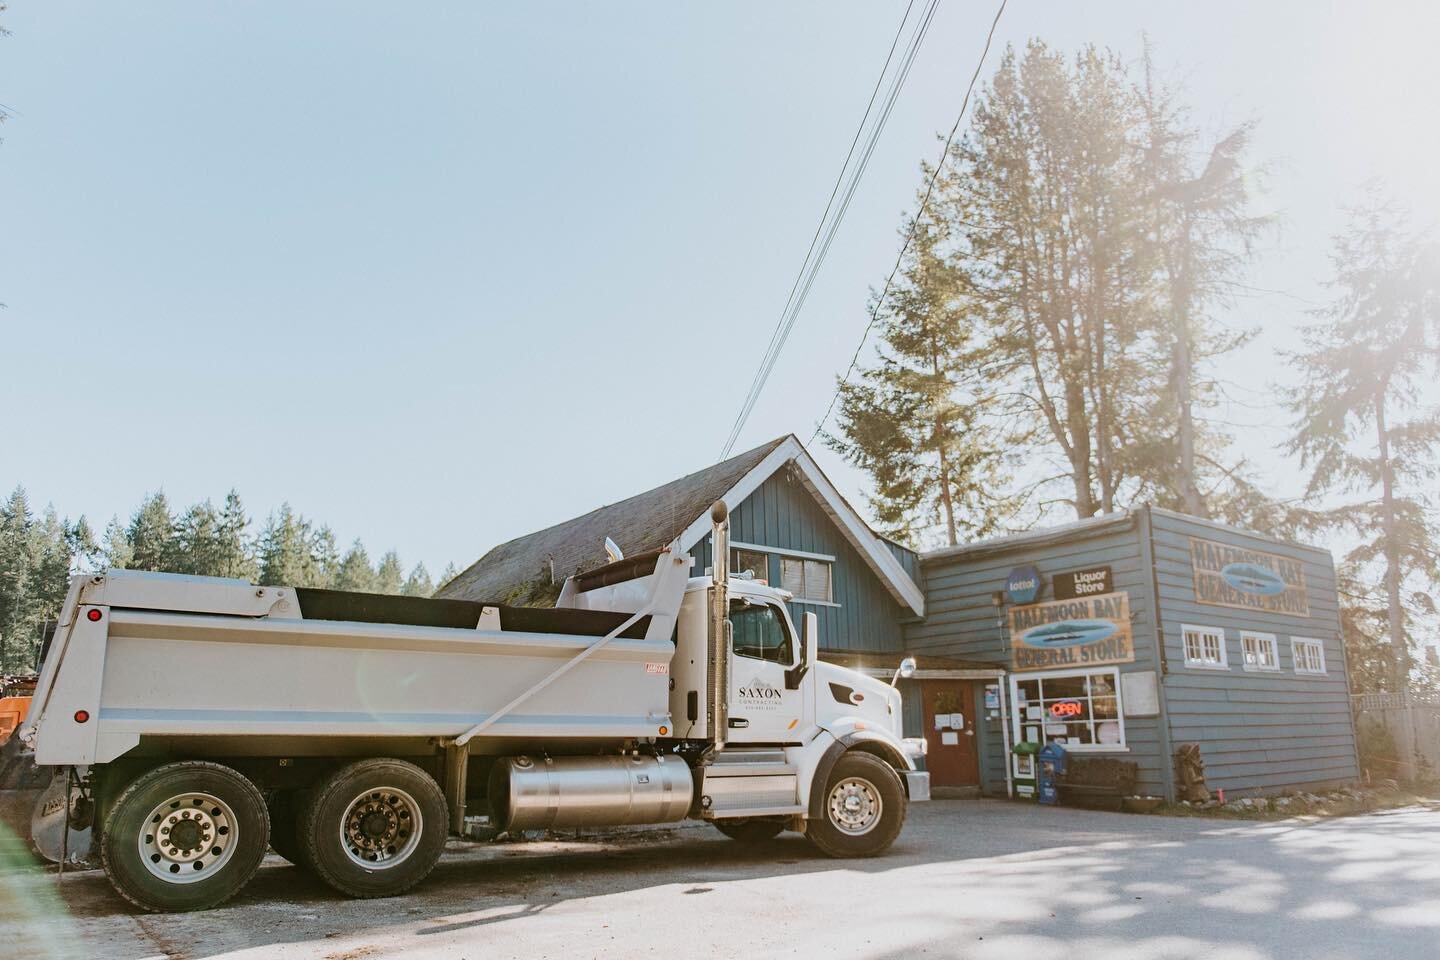 Pretty excited to be involved with this project, rebuilding the historic Halfmoon Bay General Store in the neighbourhood we grew up in. 
&bull;
&bull;
#peterbilt
#halfmoonbay
#excavation 
#sunshinecoastbc
#trucking
#dumptruck
#hitachi
#johndeere
#lov